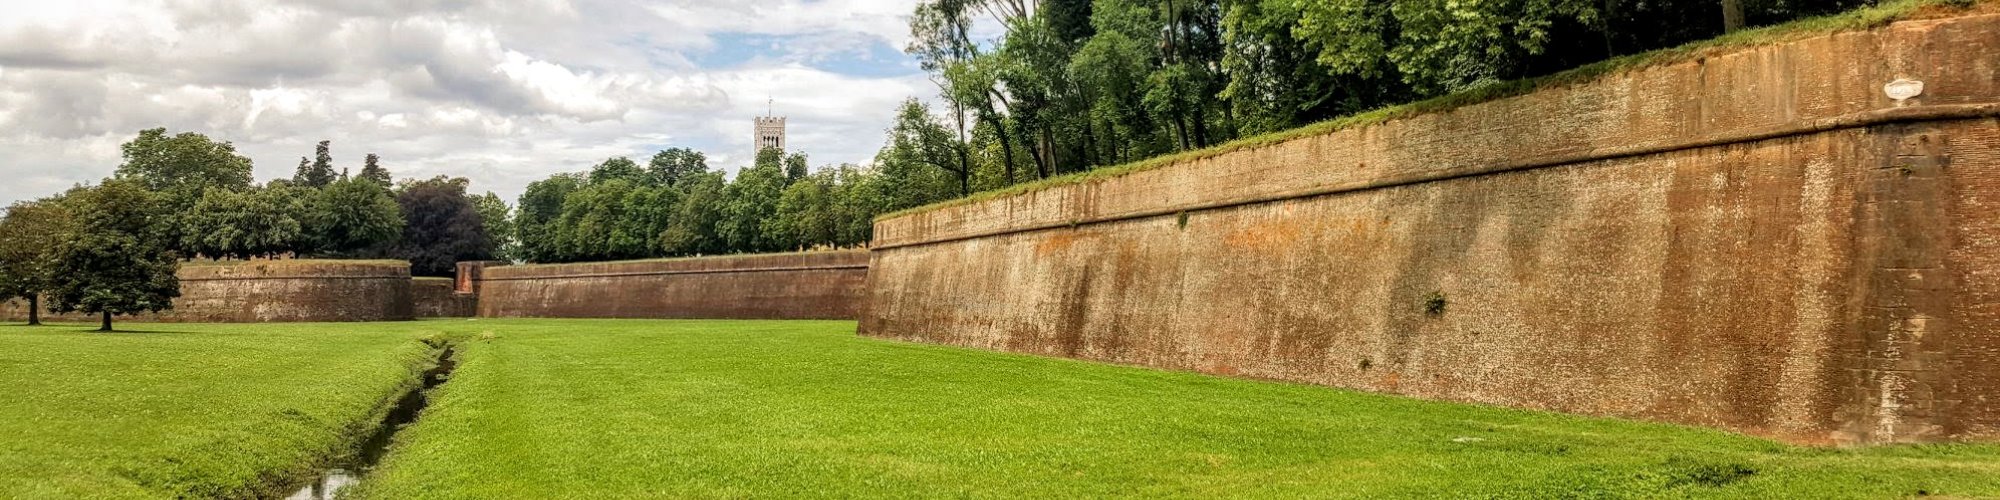 The walls of Lucca